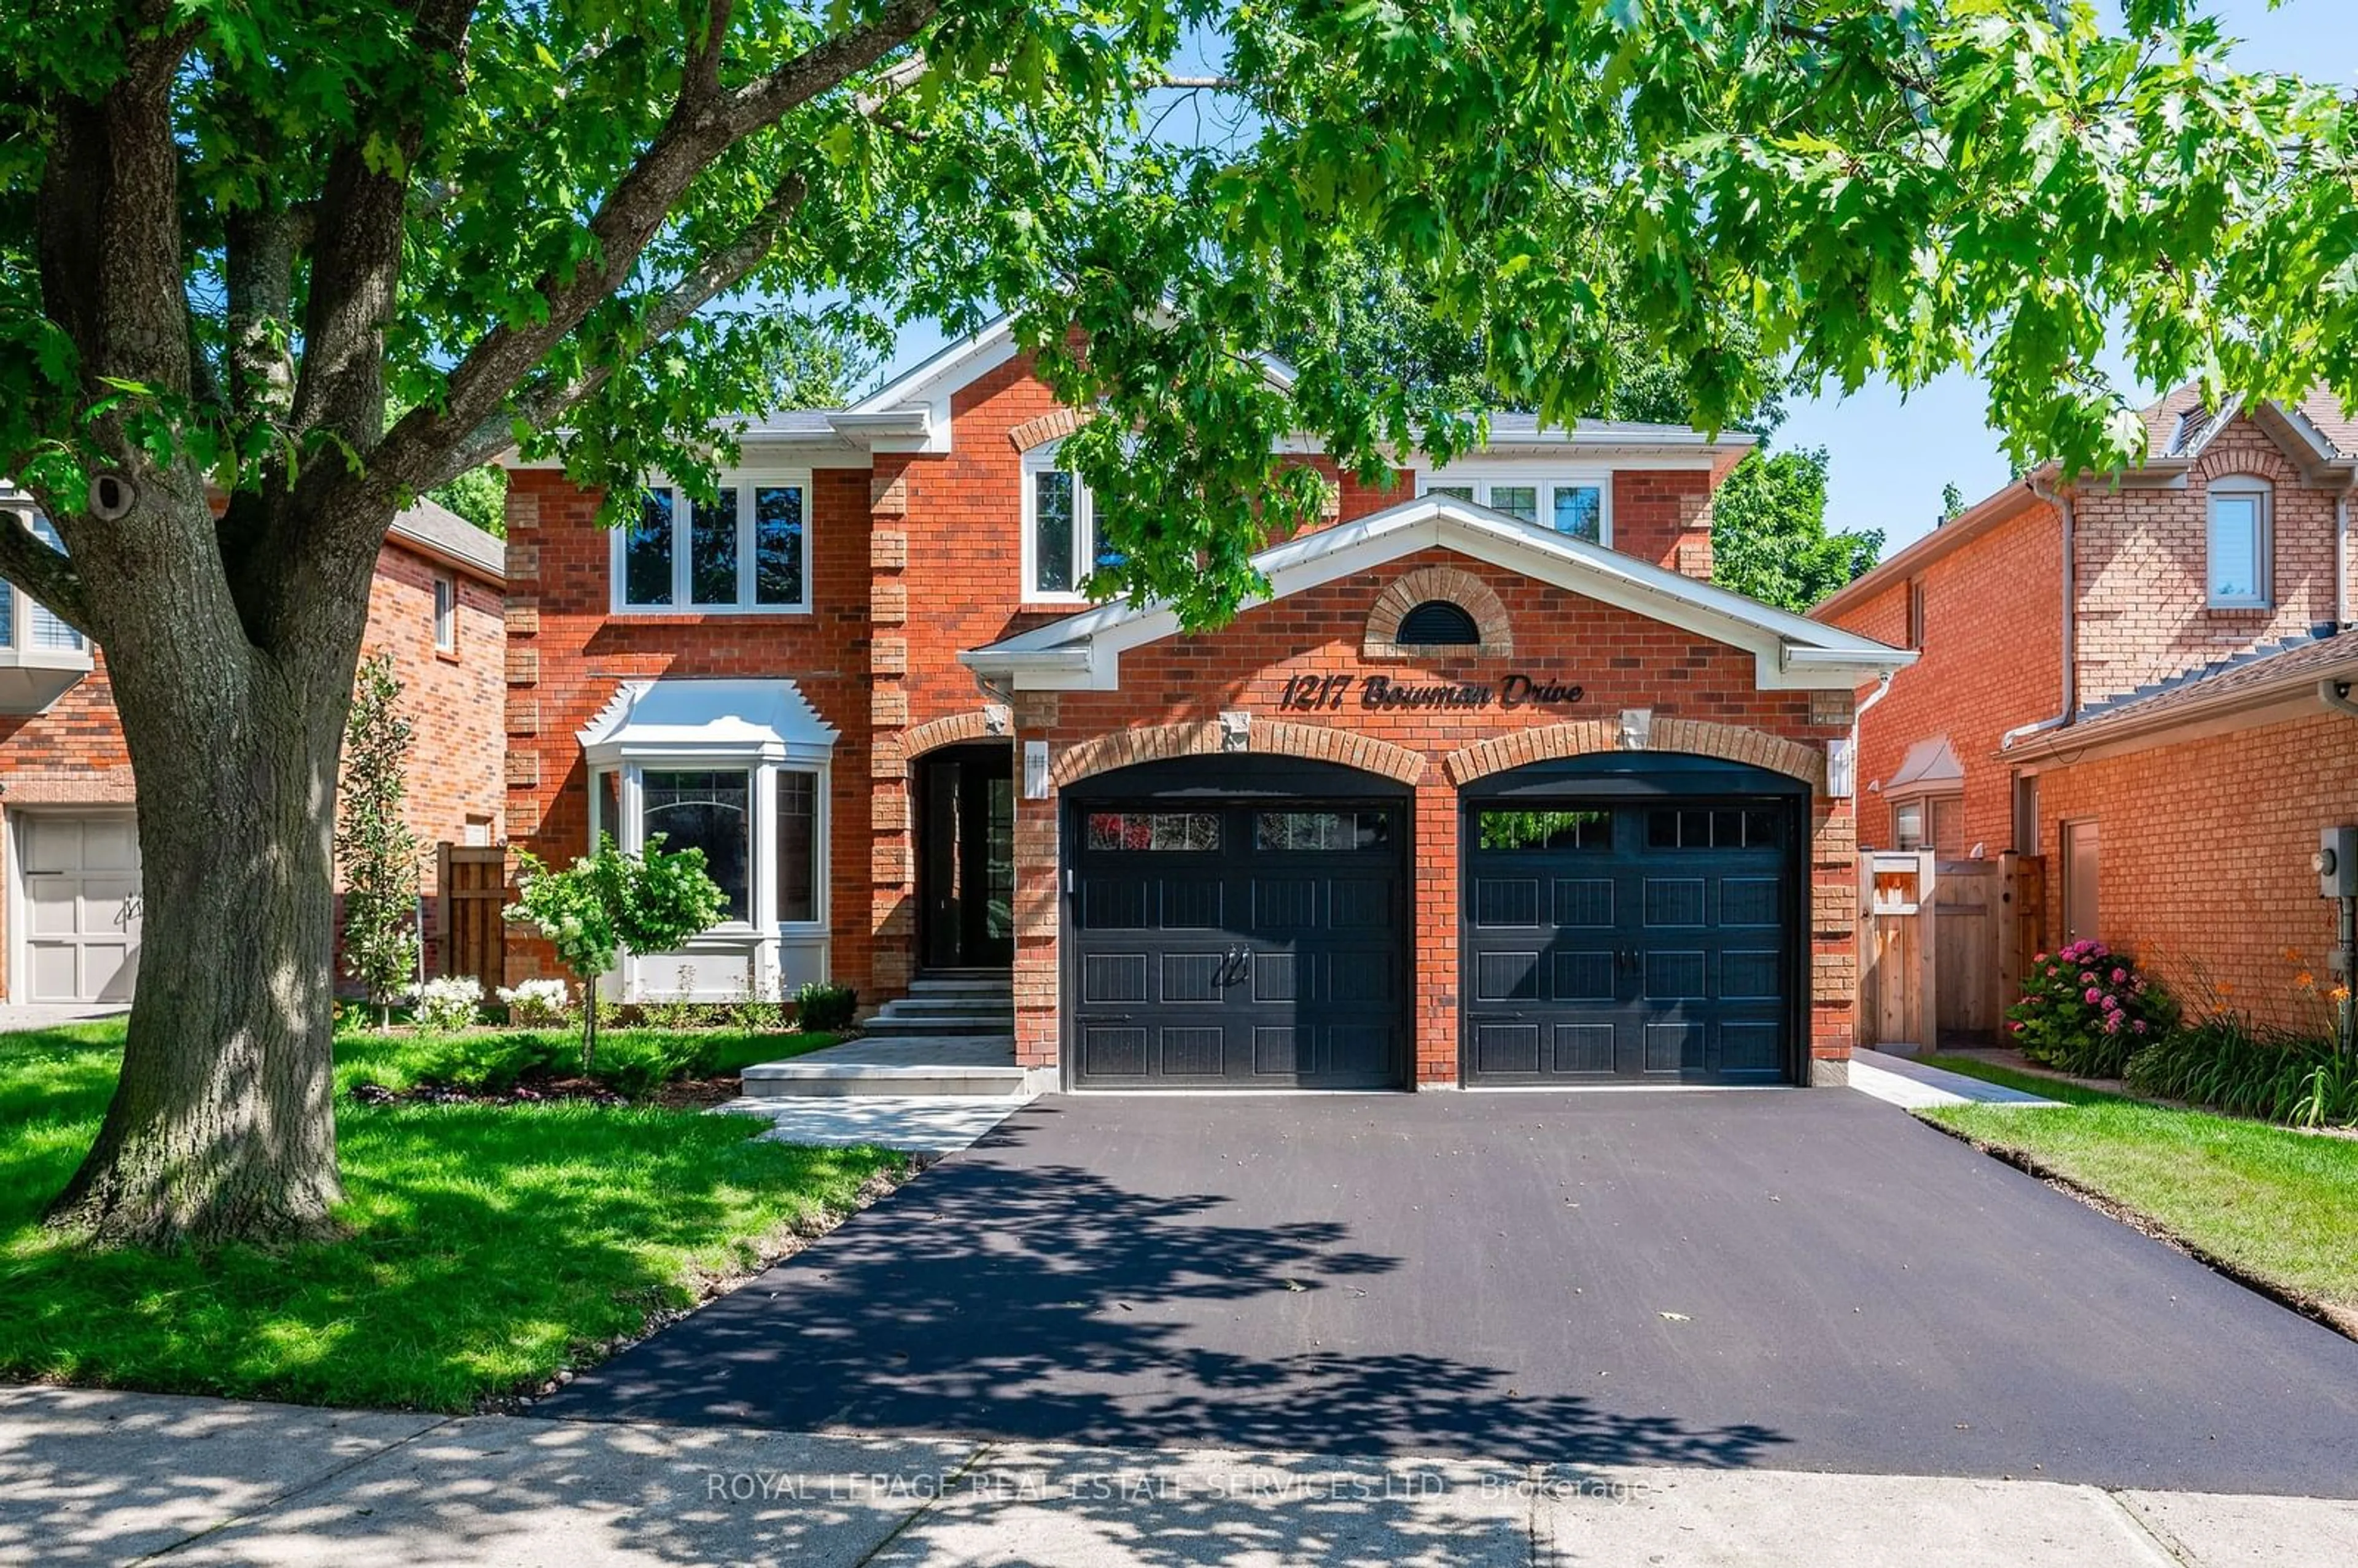 Home with brick exterior material for 1217 Bowman Dr, Oakville Ontario L6M 2T4